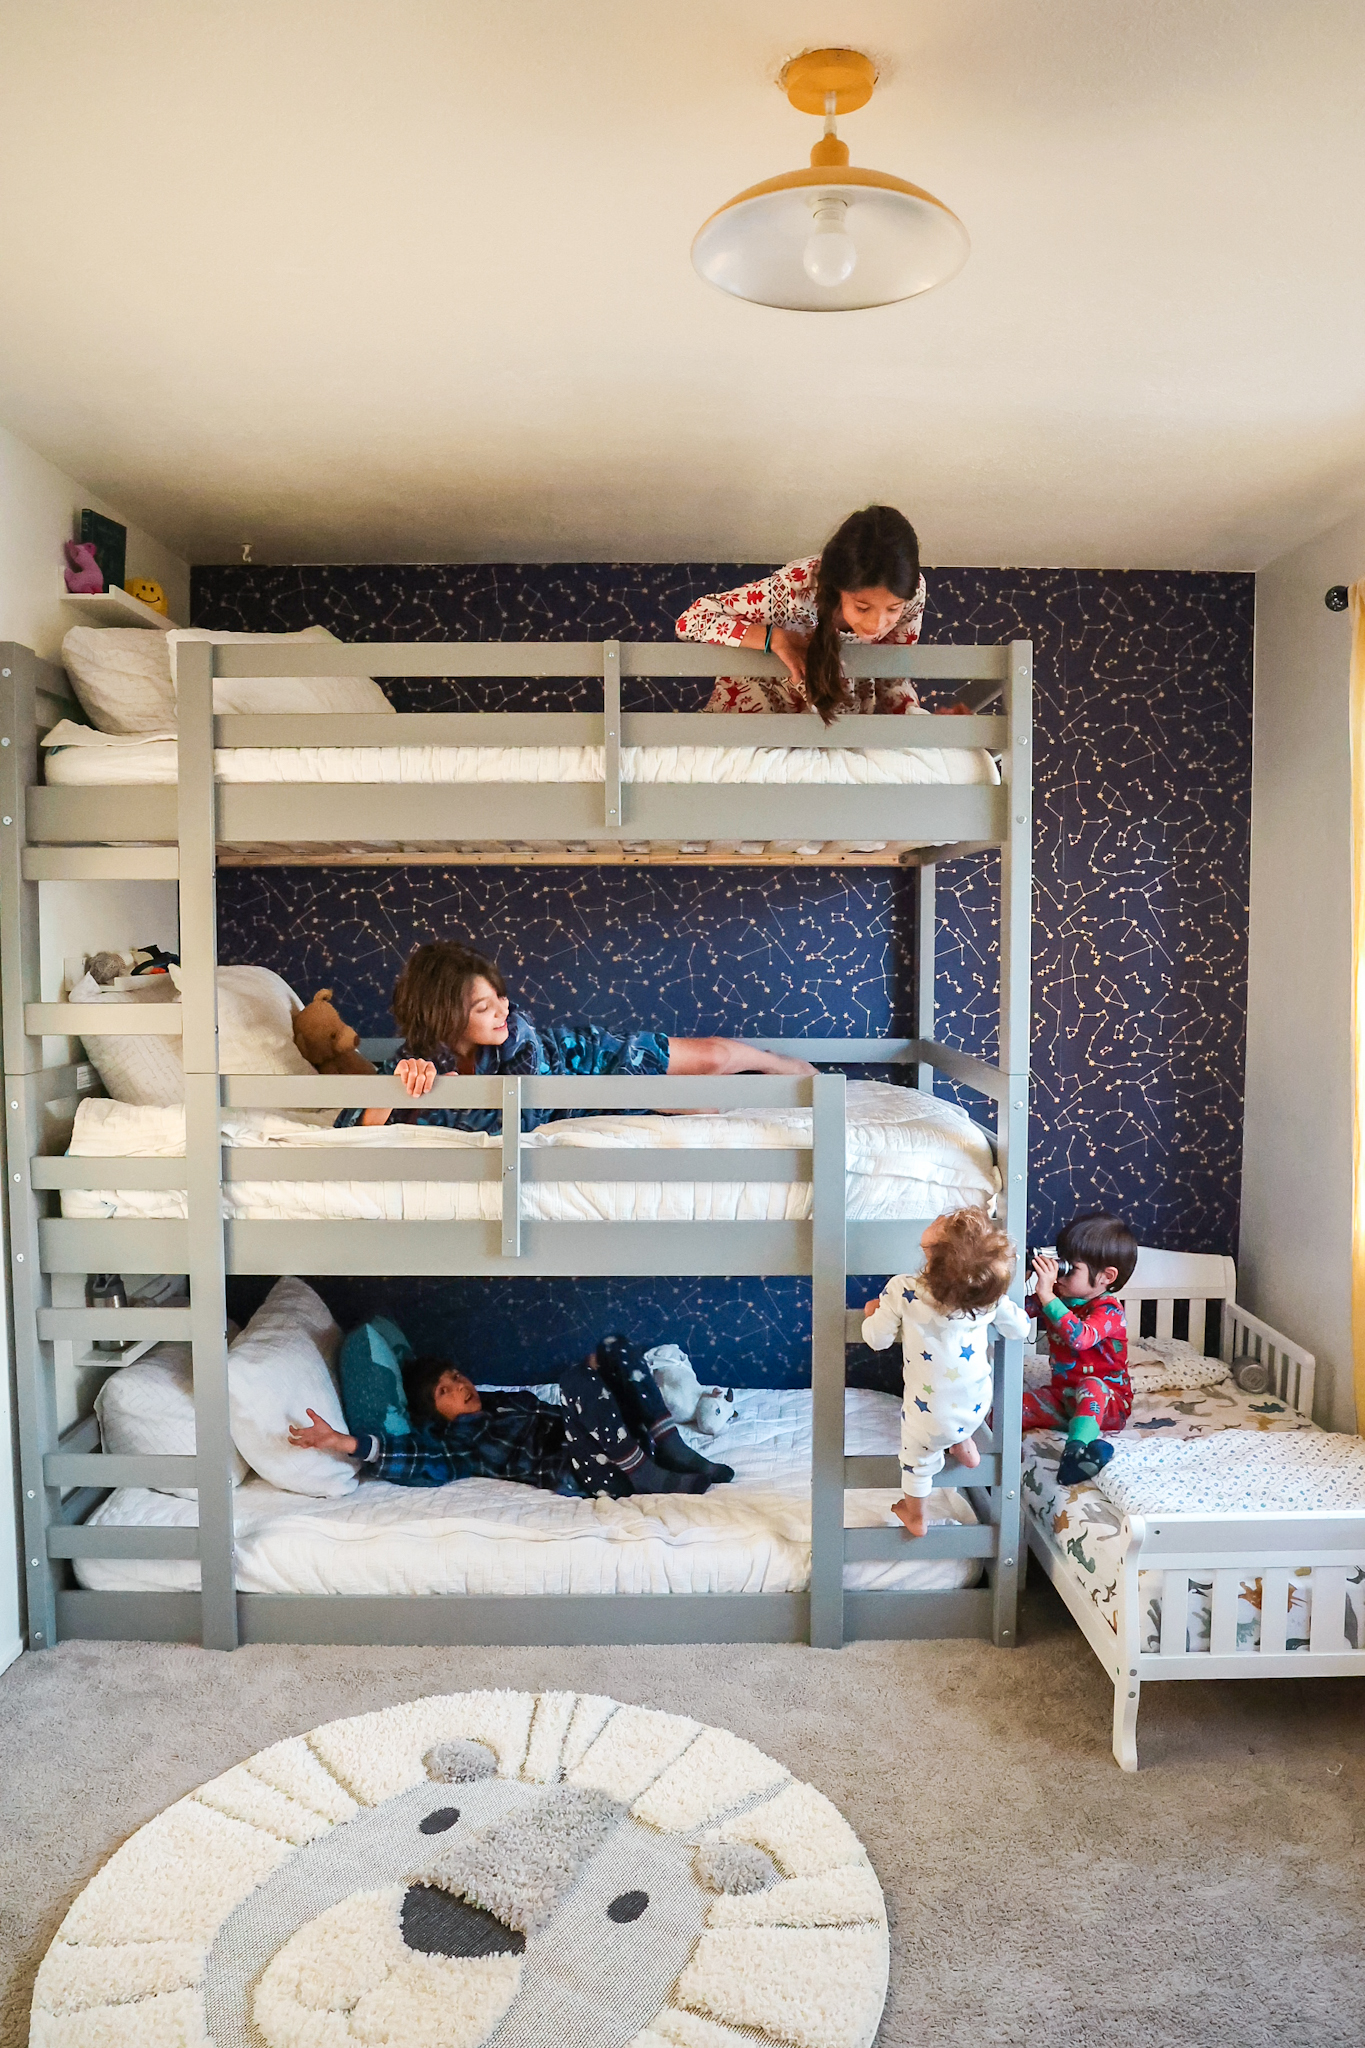 Our Kids Triple Bunk Room   Local Passport Family